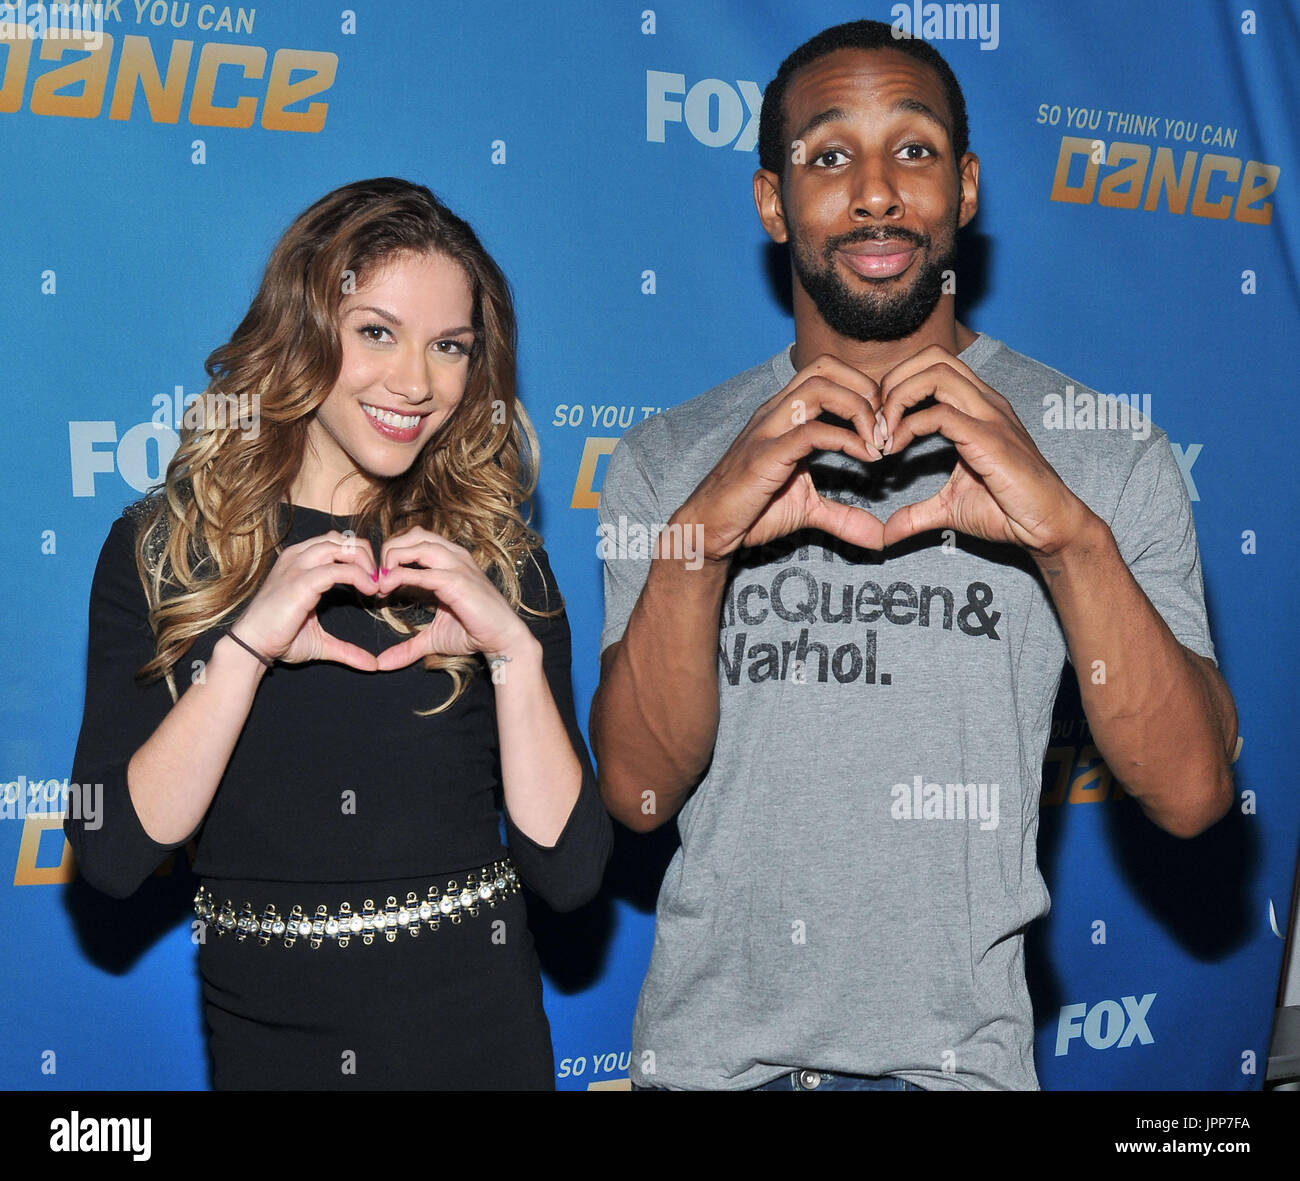 SYTYCD AllStars Allison Holker & Stephen Boss AKA tWitch at the So You Think You Can Dance Season 9 Finale held at the CBS Television Studio Center in Los Angeles, CA.The event took place on Tuesday, September 18, 2012. Photo by Sthanlee B. Mirador_Pacific Rim Photo Press. Stock Photo